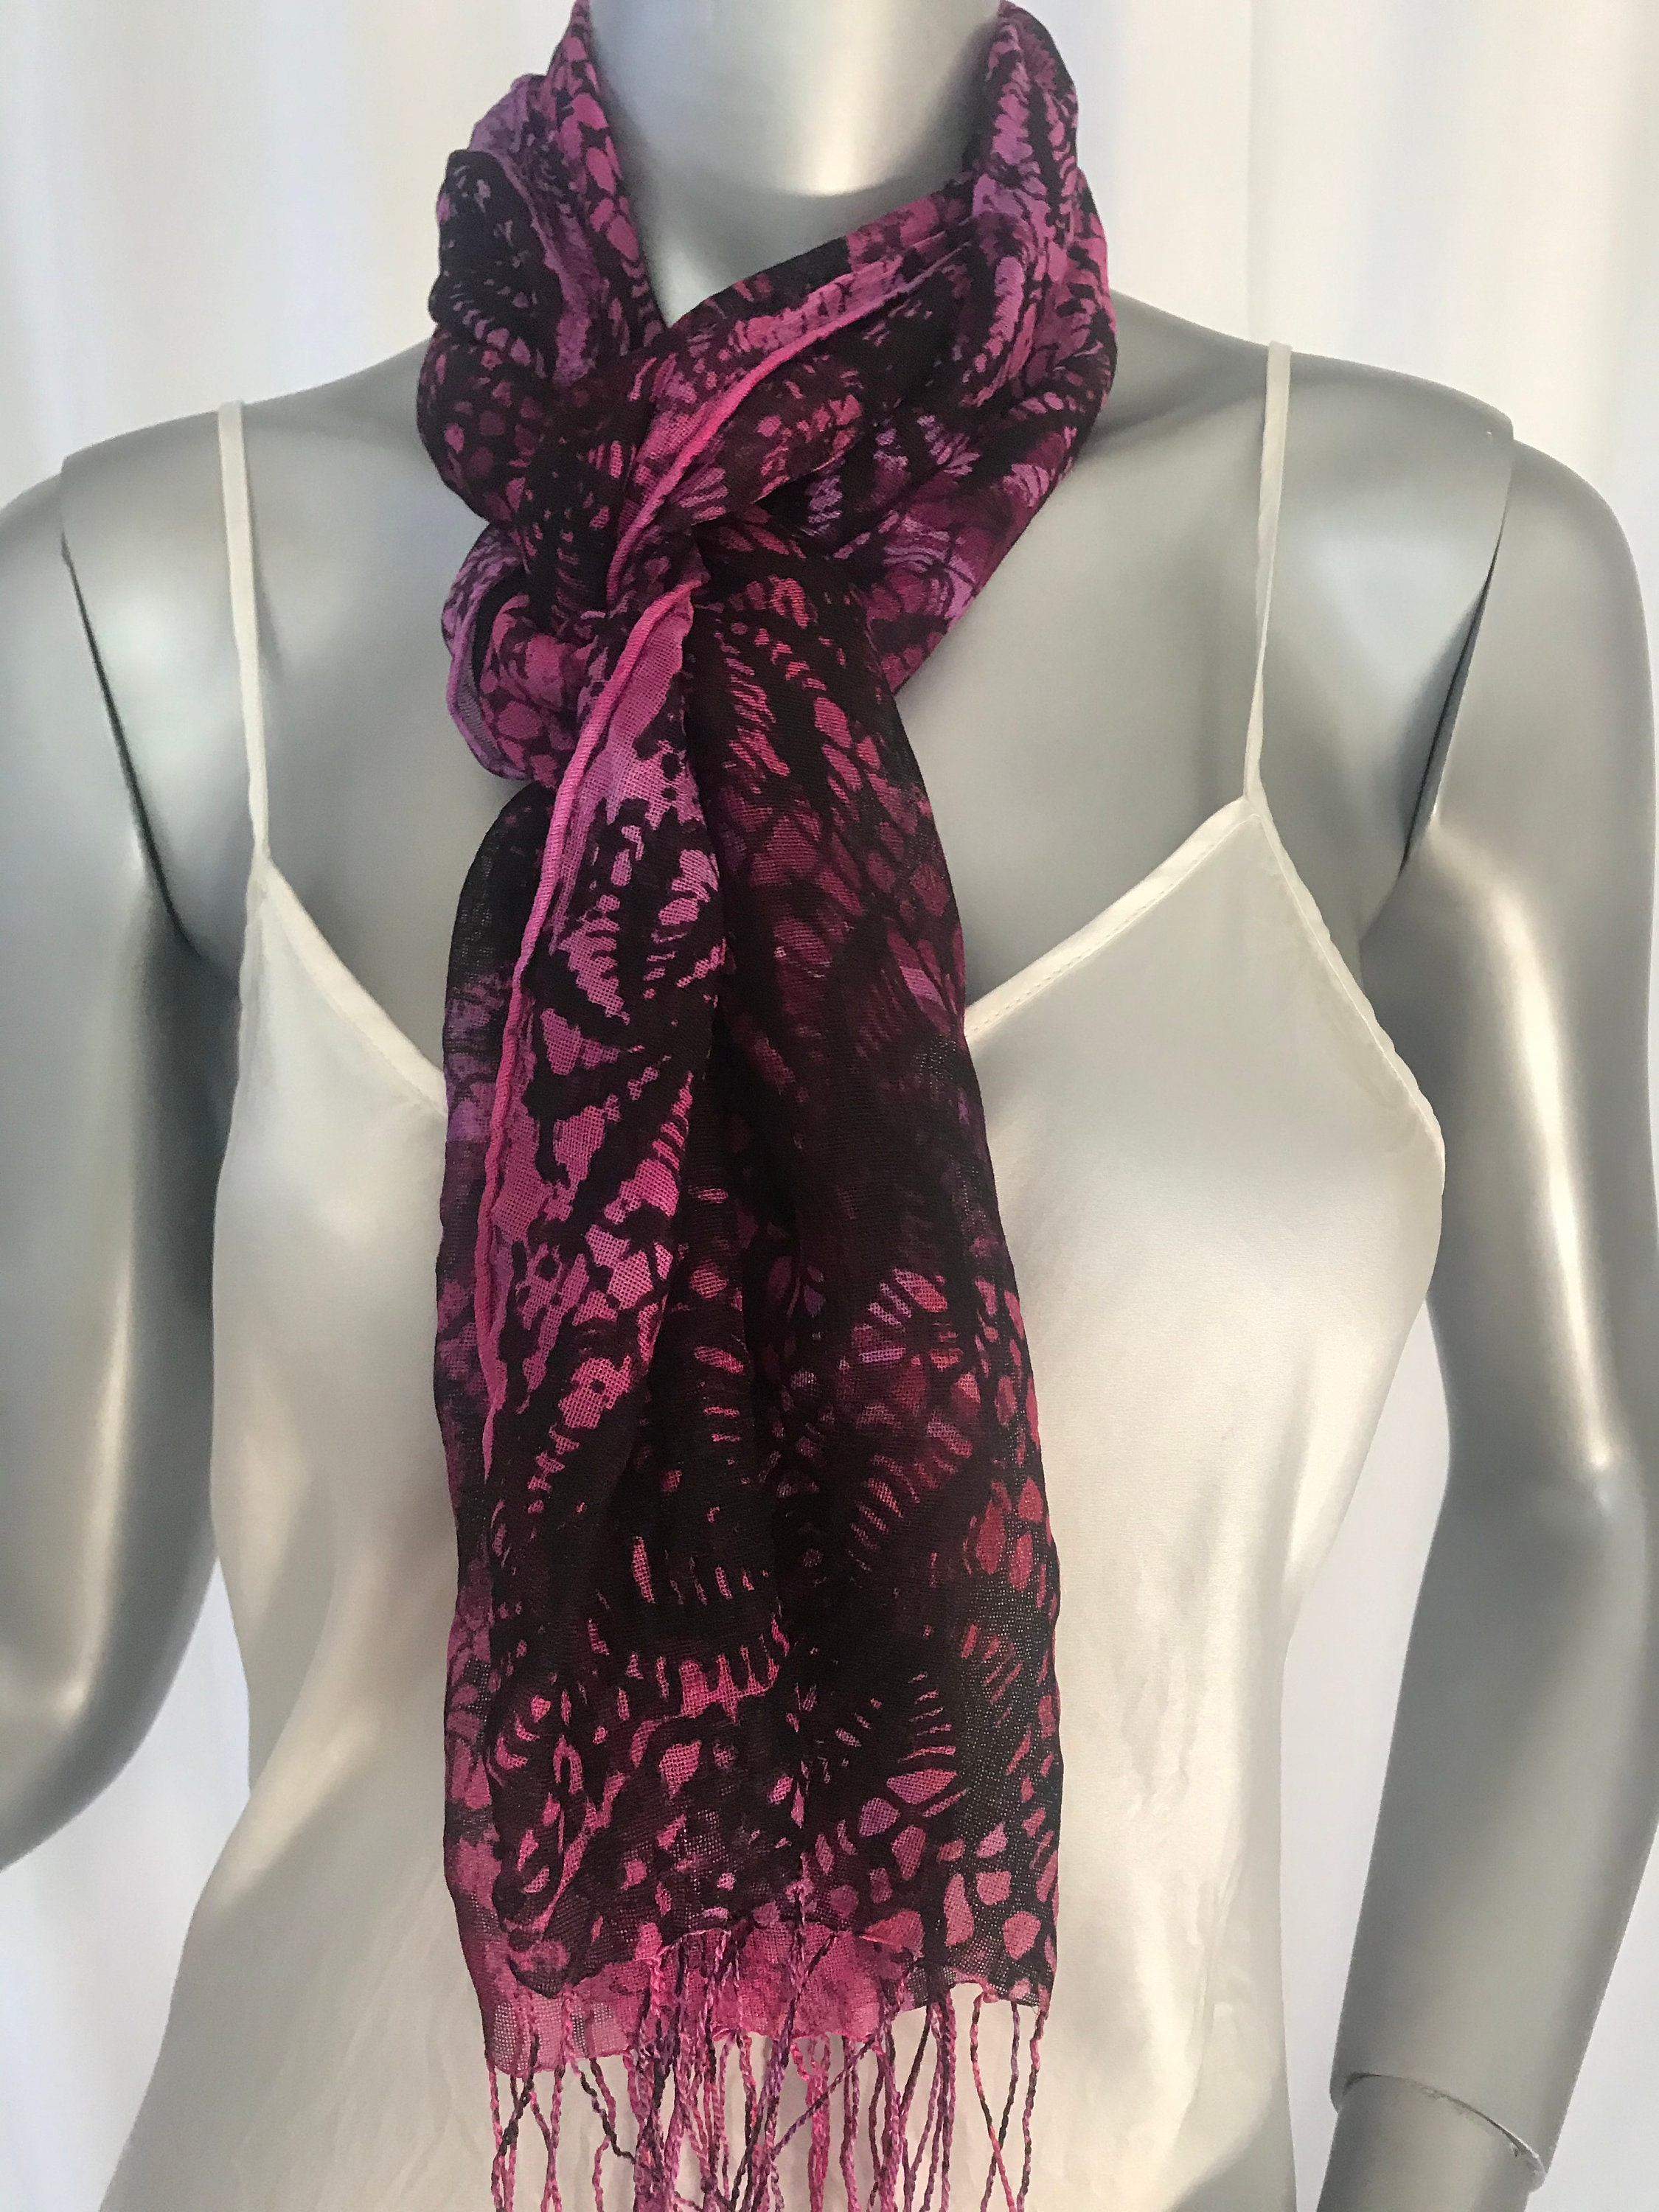 Silk mesh scarf with a 3 inch fringe, Hot Pink and Black